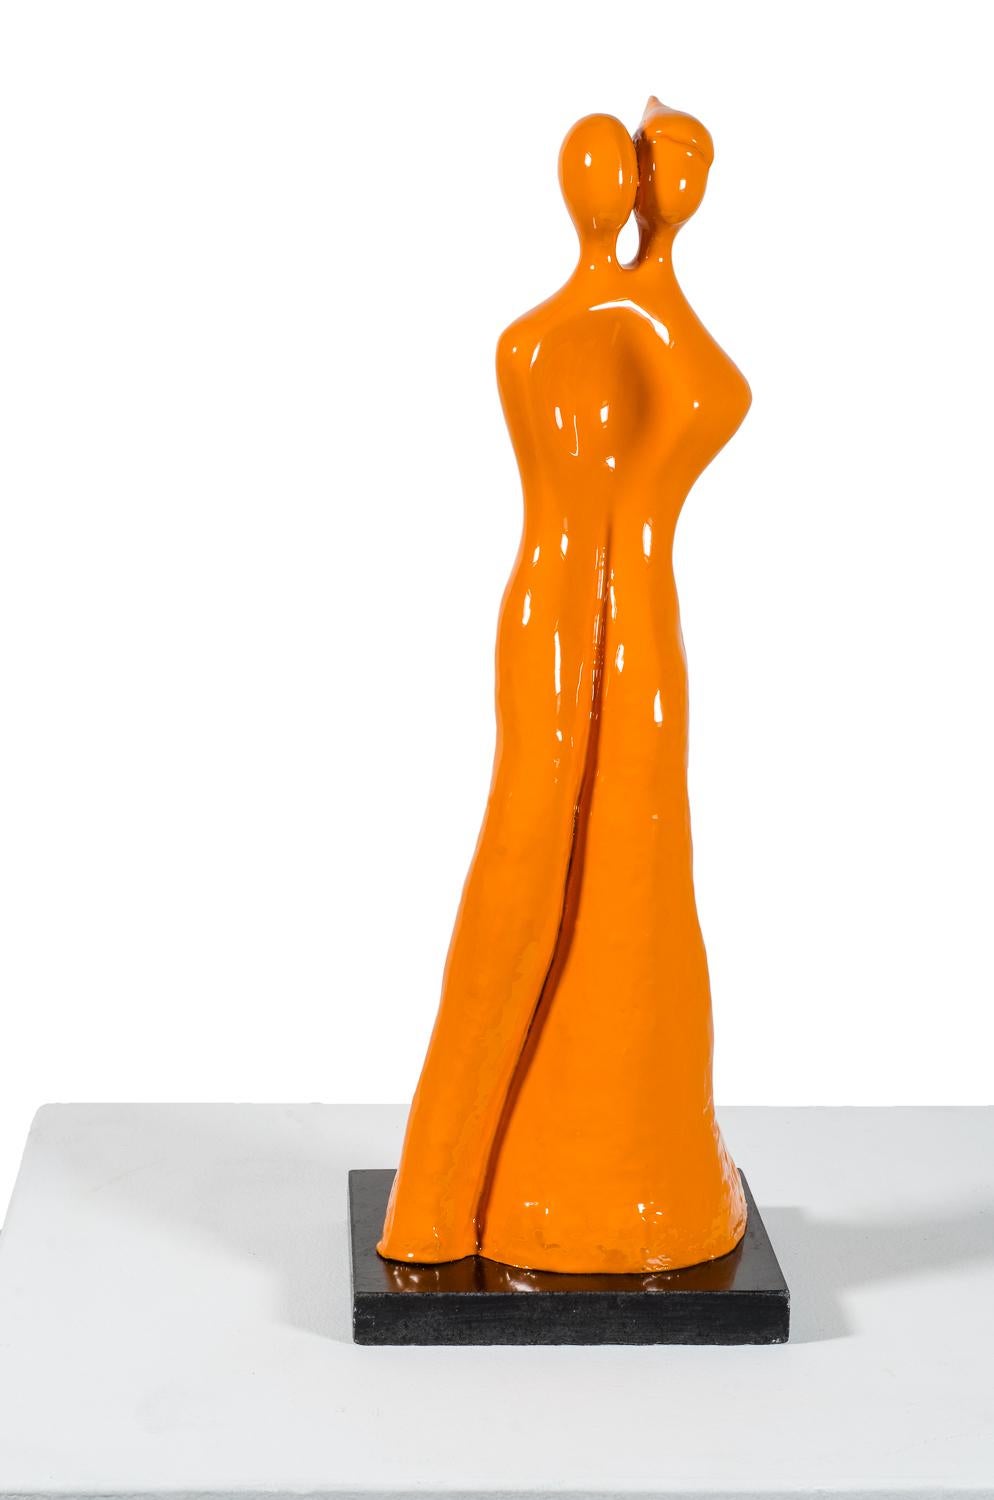 Beatriz Gerenstein Abstract Sculpture - Soul Mates #1 (in orange) When in love their souls and bodies fuse into just one